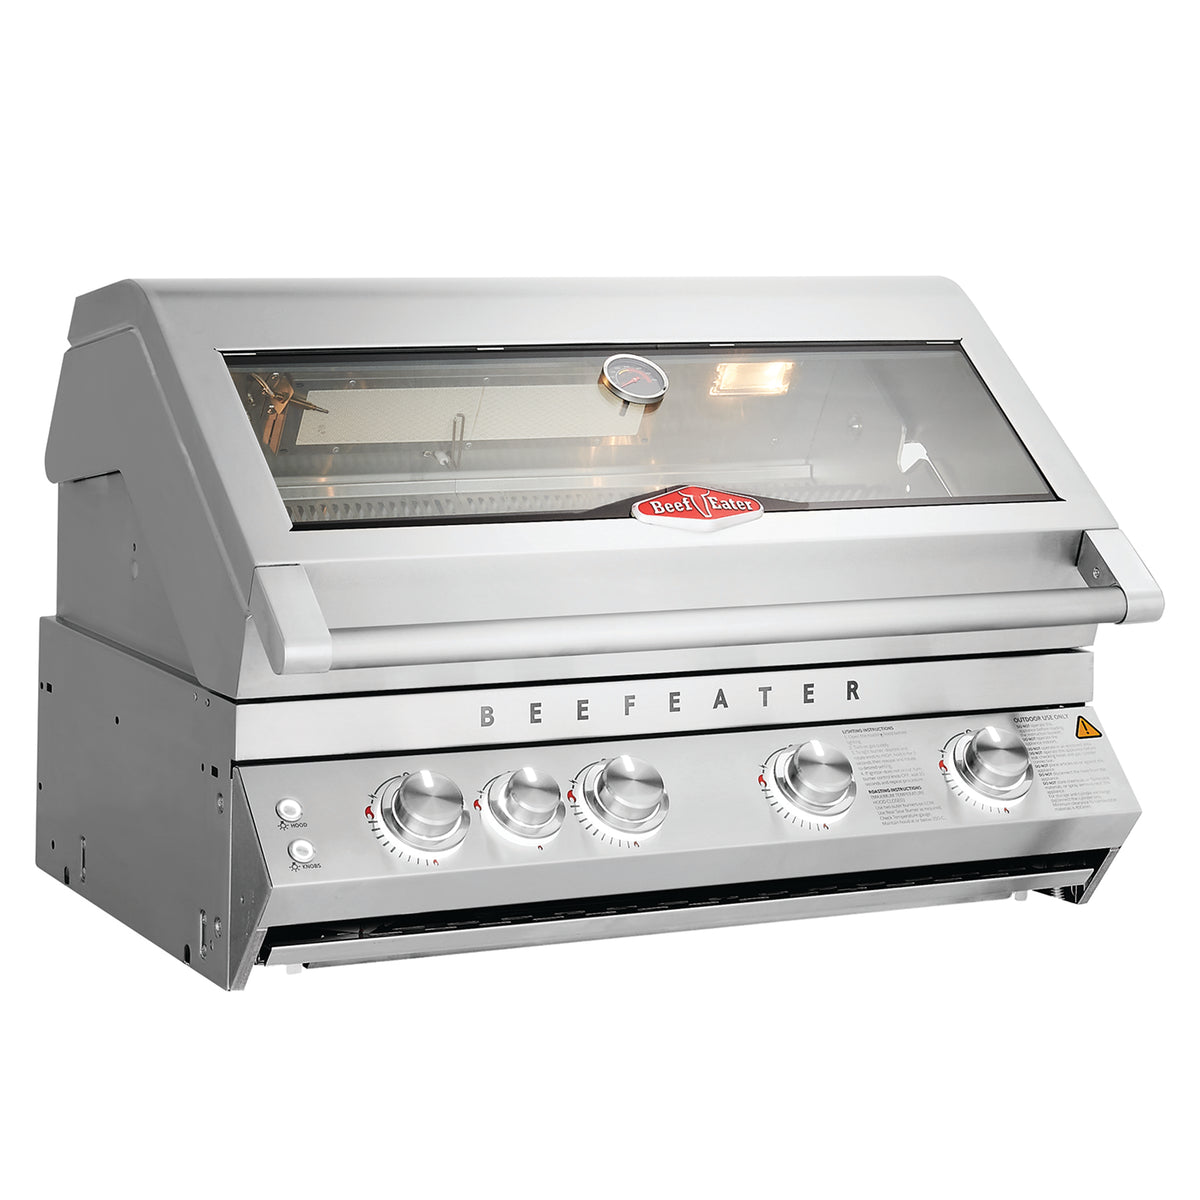 BeefEater 7000 Series Premium 4 Burner Build-In Gas Barbecue